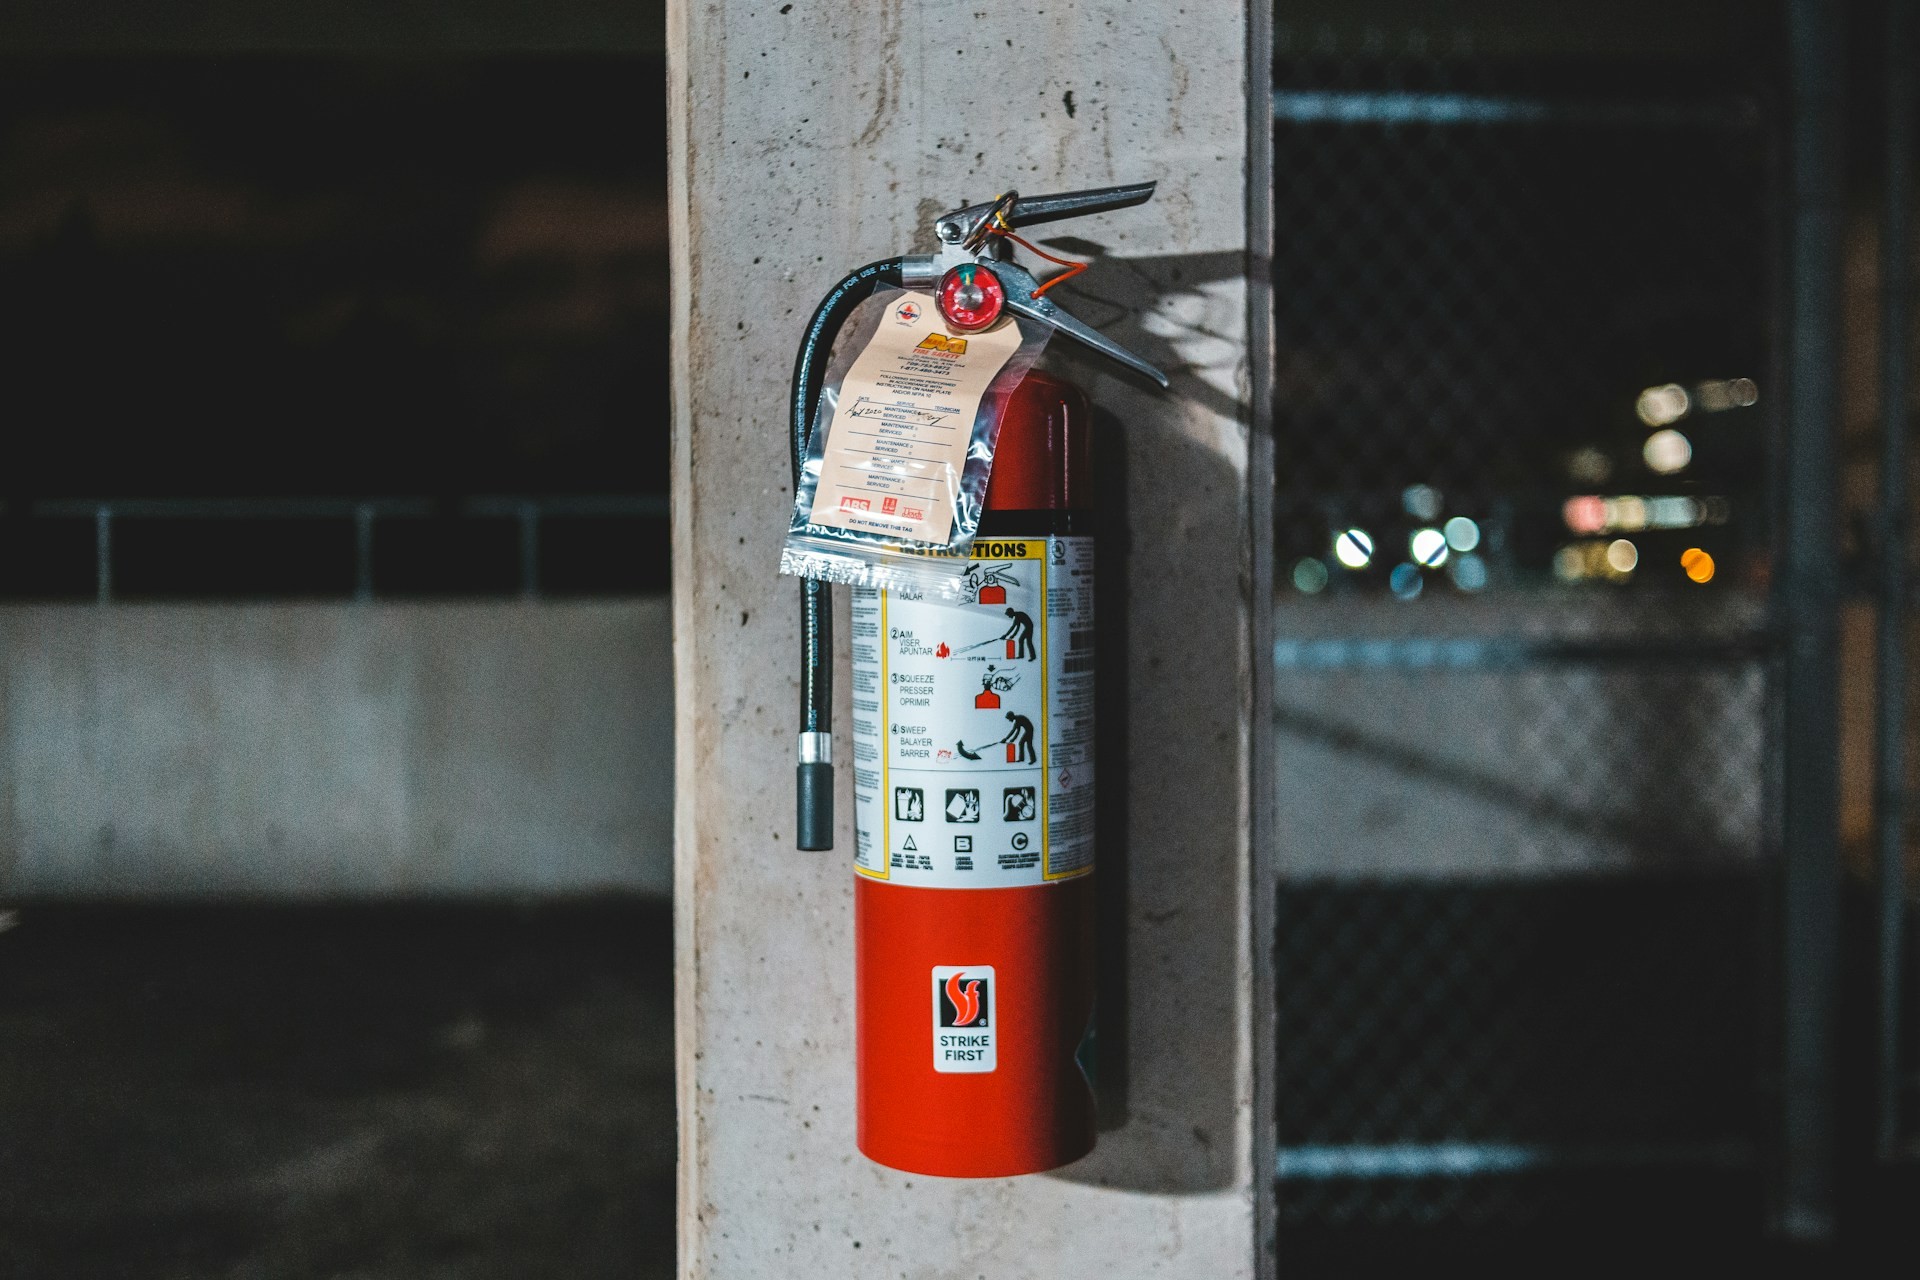 5 Common Fire Hazards In The Workplace